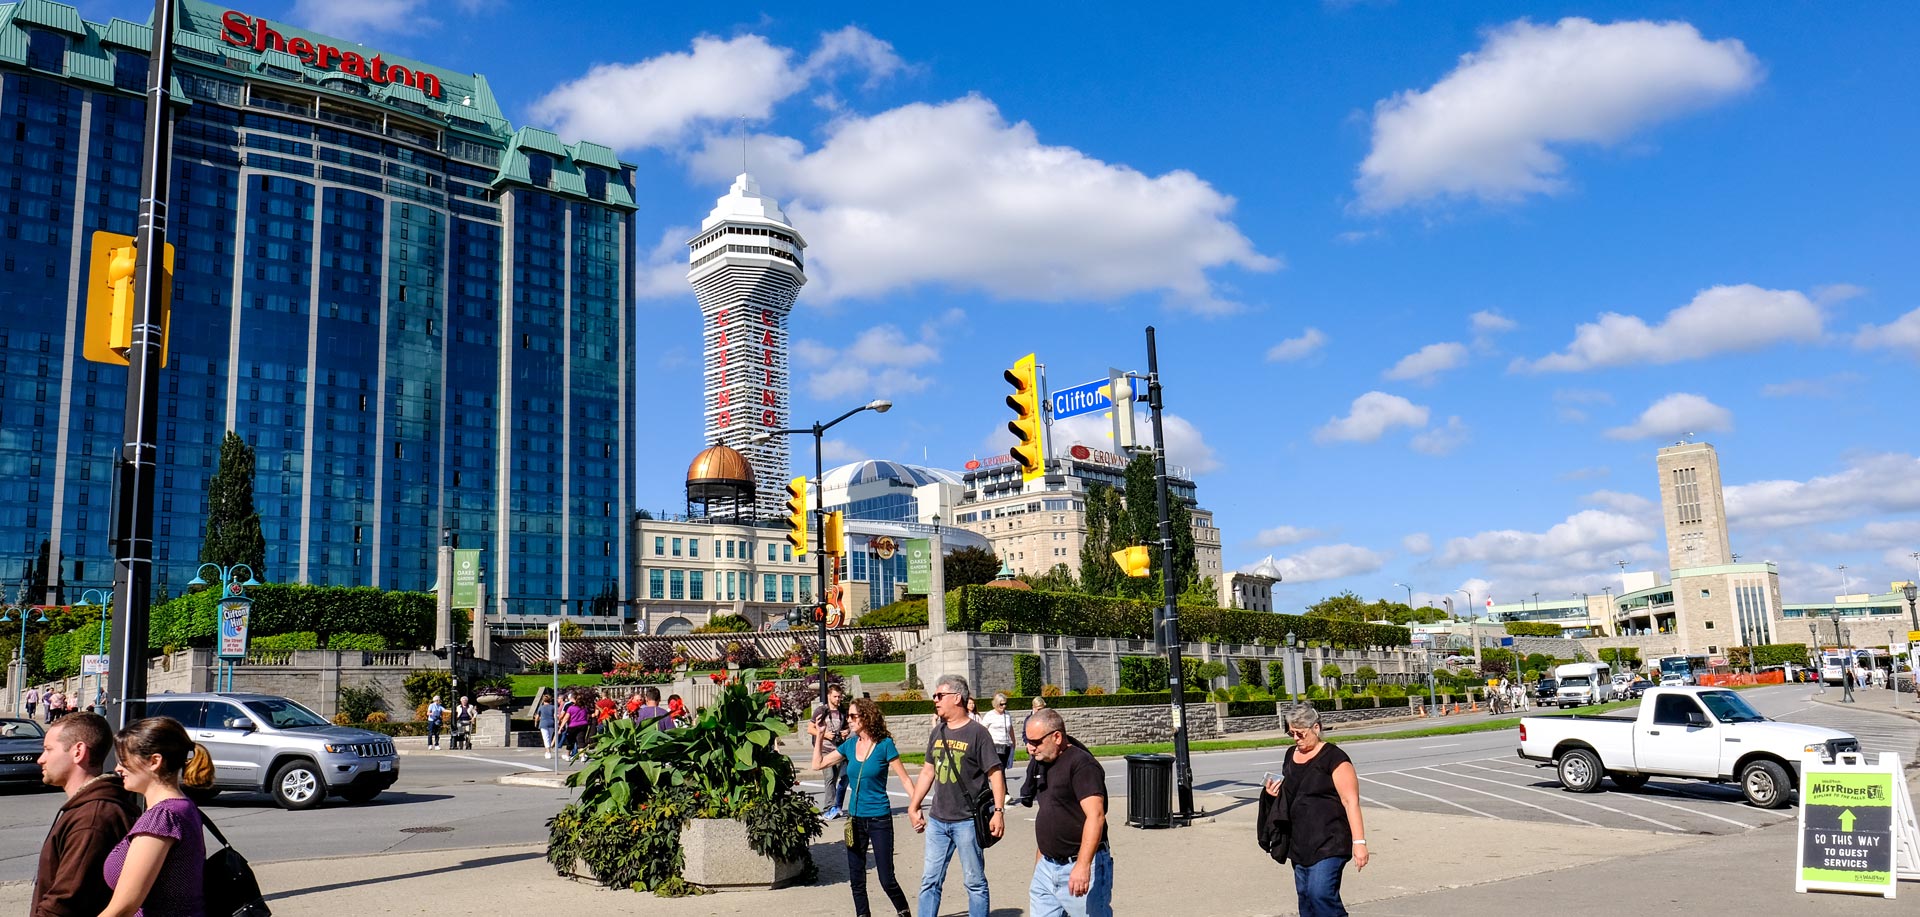 Top 10 Places to Stay in Niagara Falls